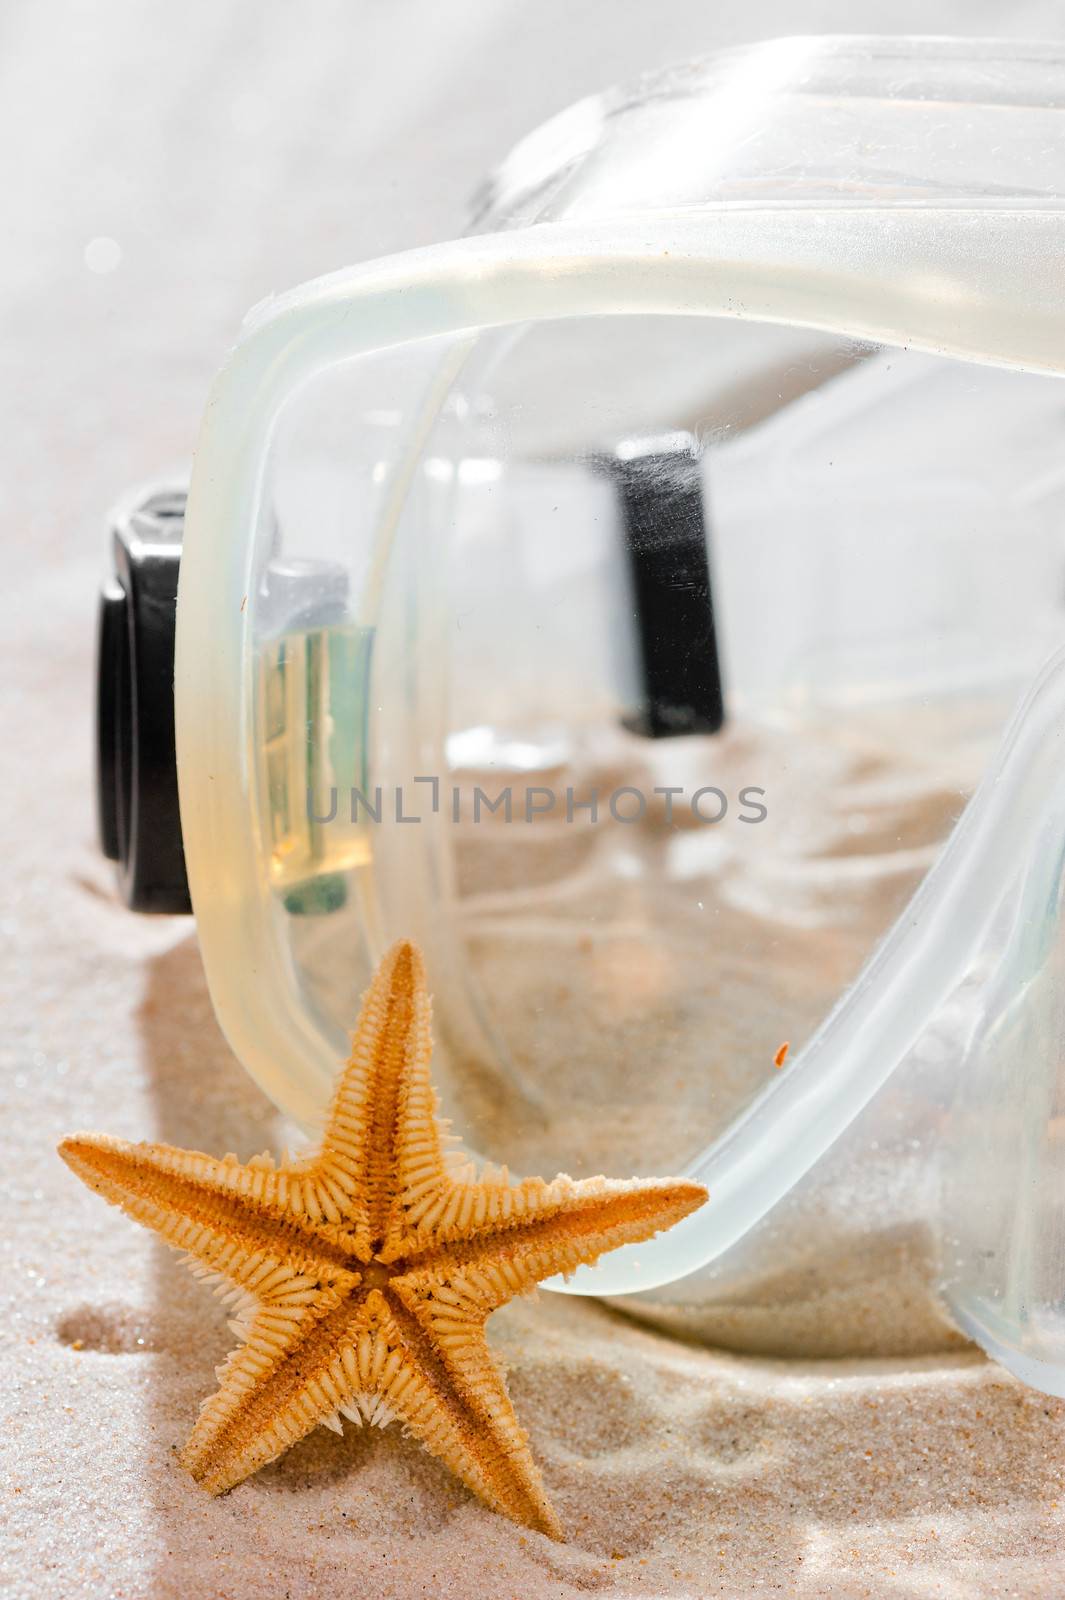 mask for snorkeling and starfish on dry sand